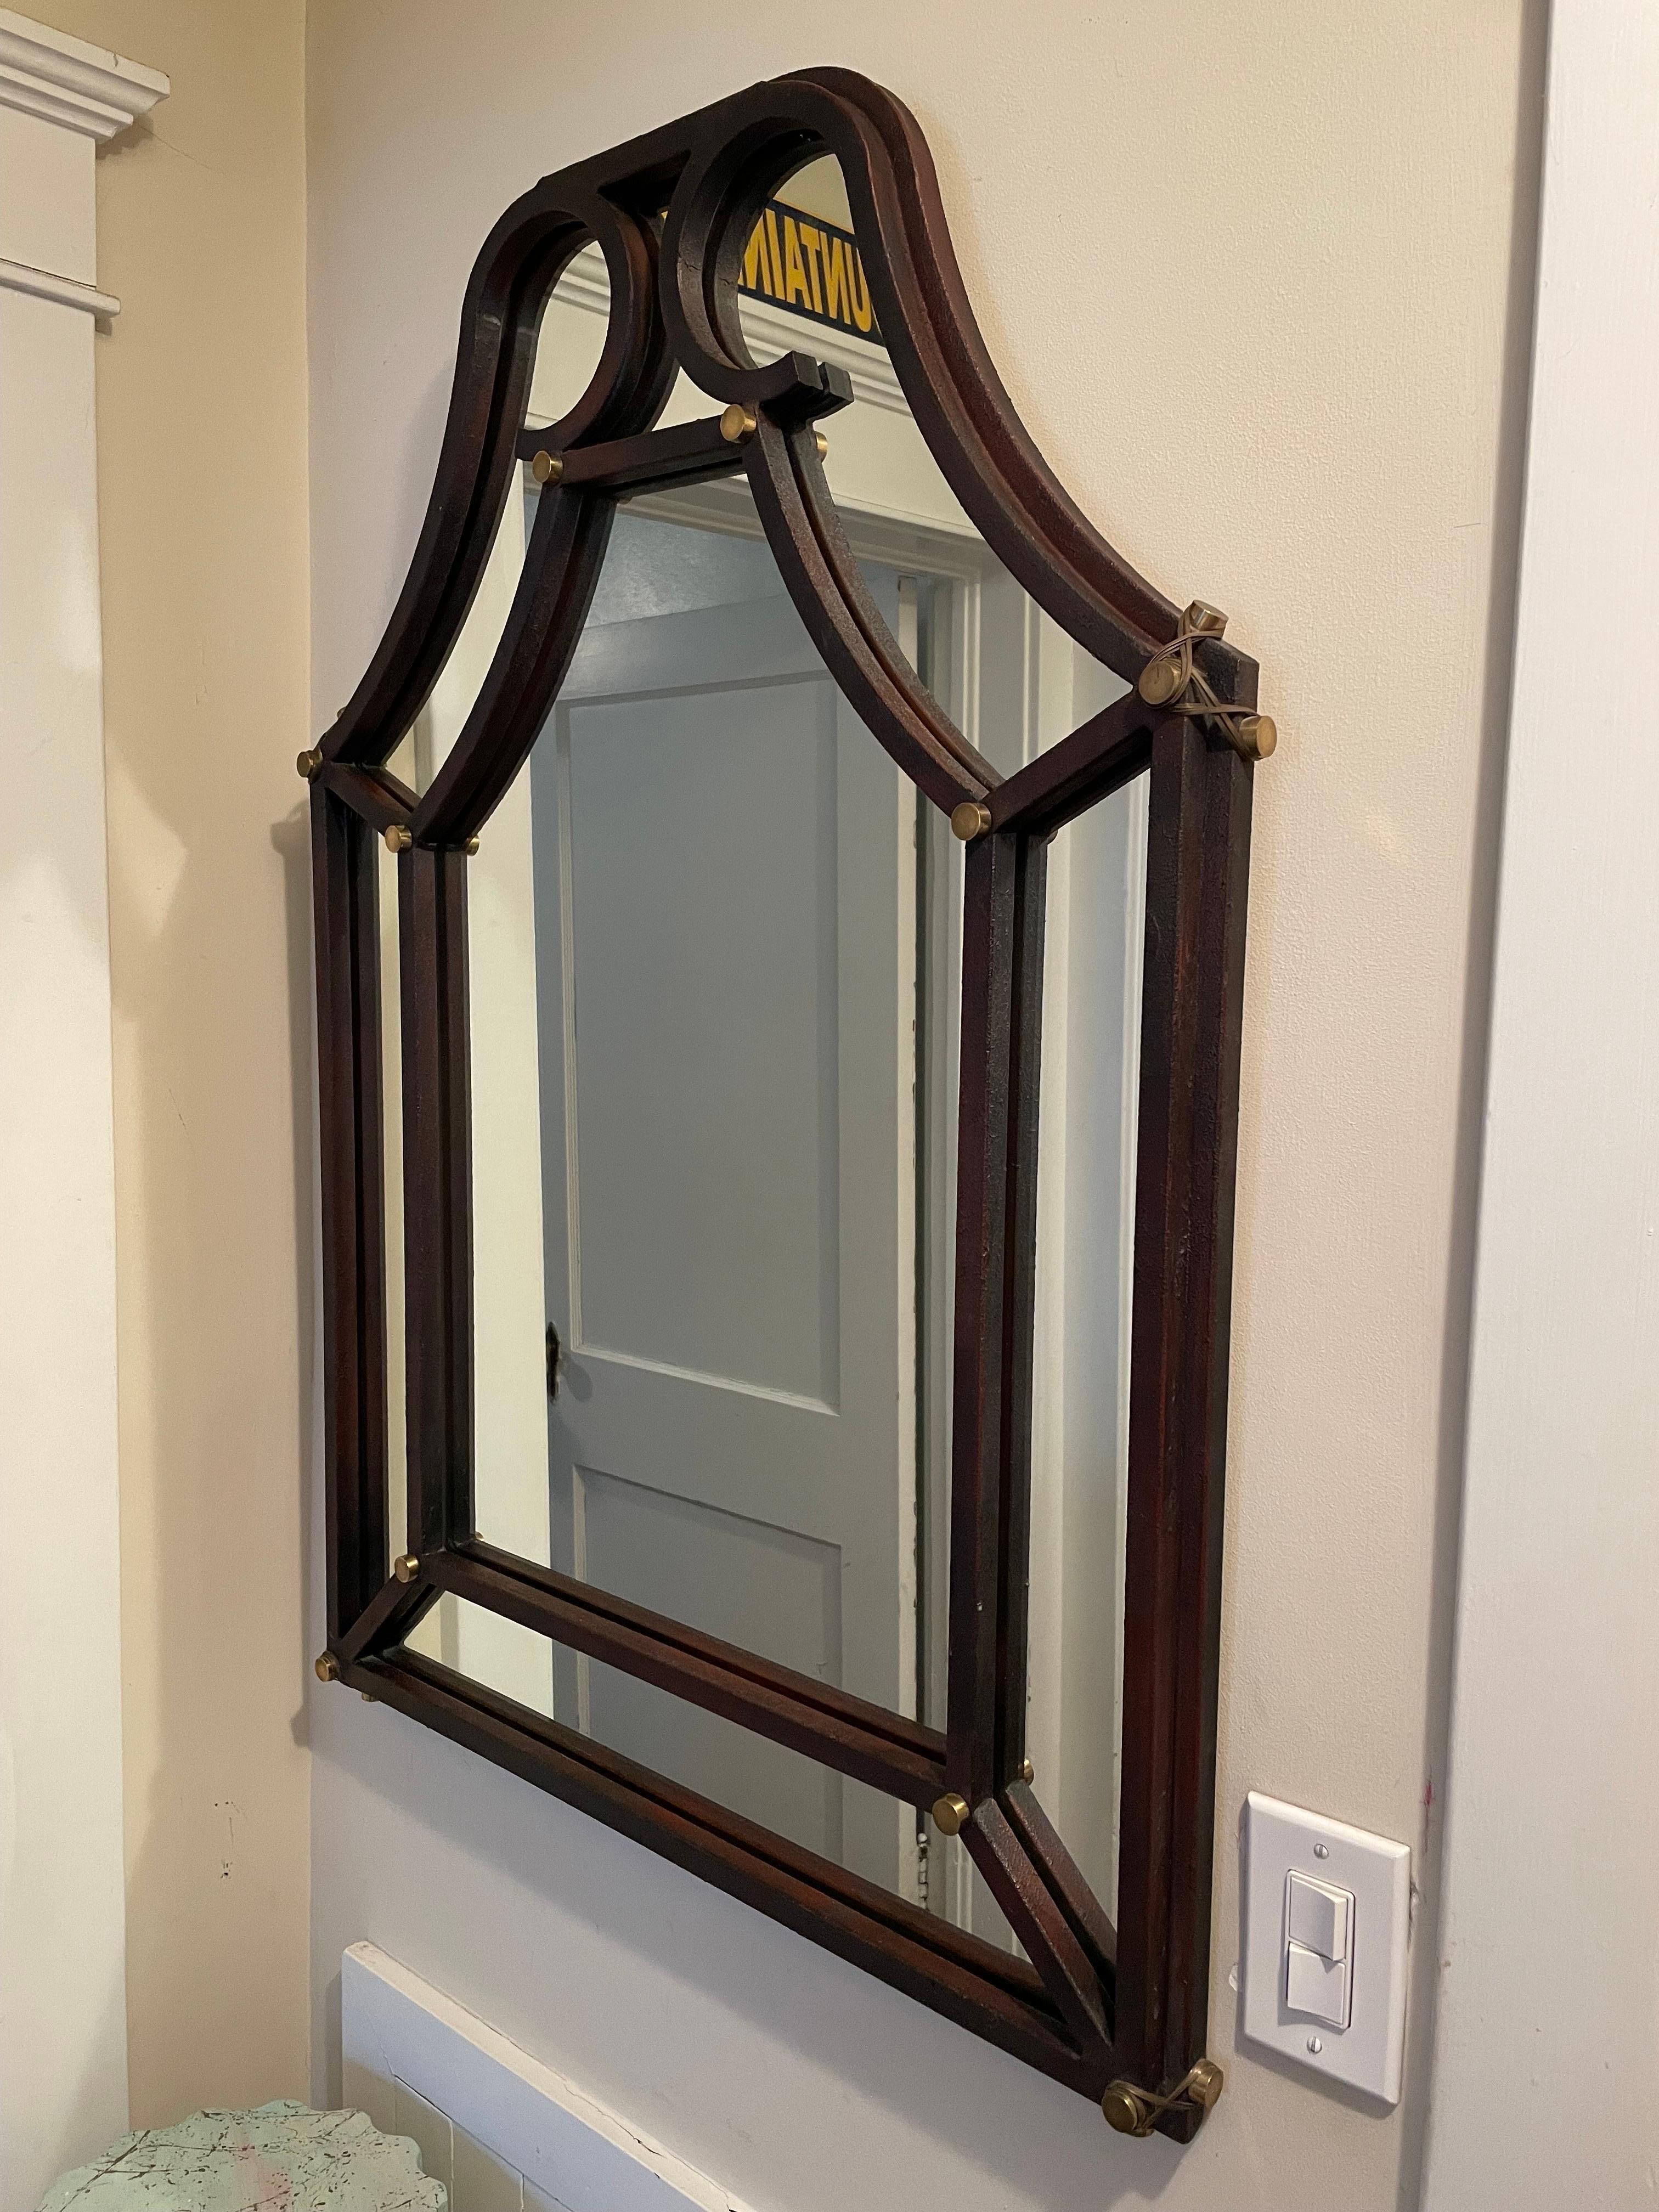 Wonderful Hart Associates post modern cathedral mirror in brown with auburn highlights and brass hardware. Brass accent corner buttons wrapped with brass banding. Frame is stepped for a heafty 1.75